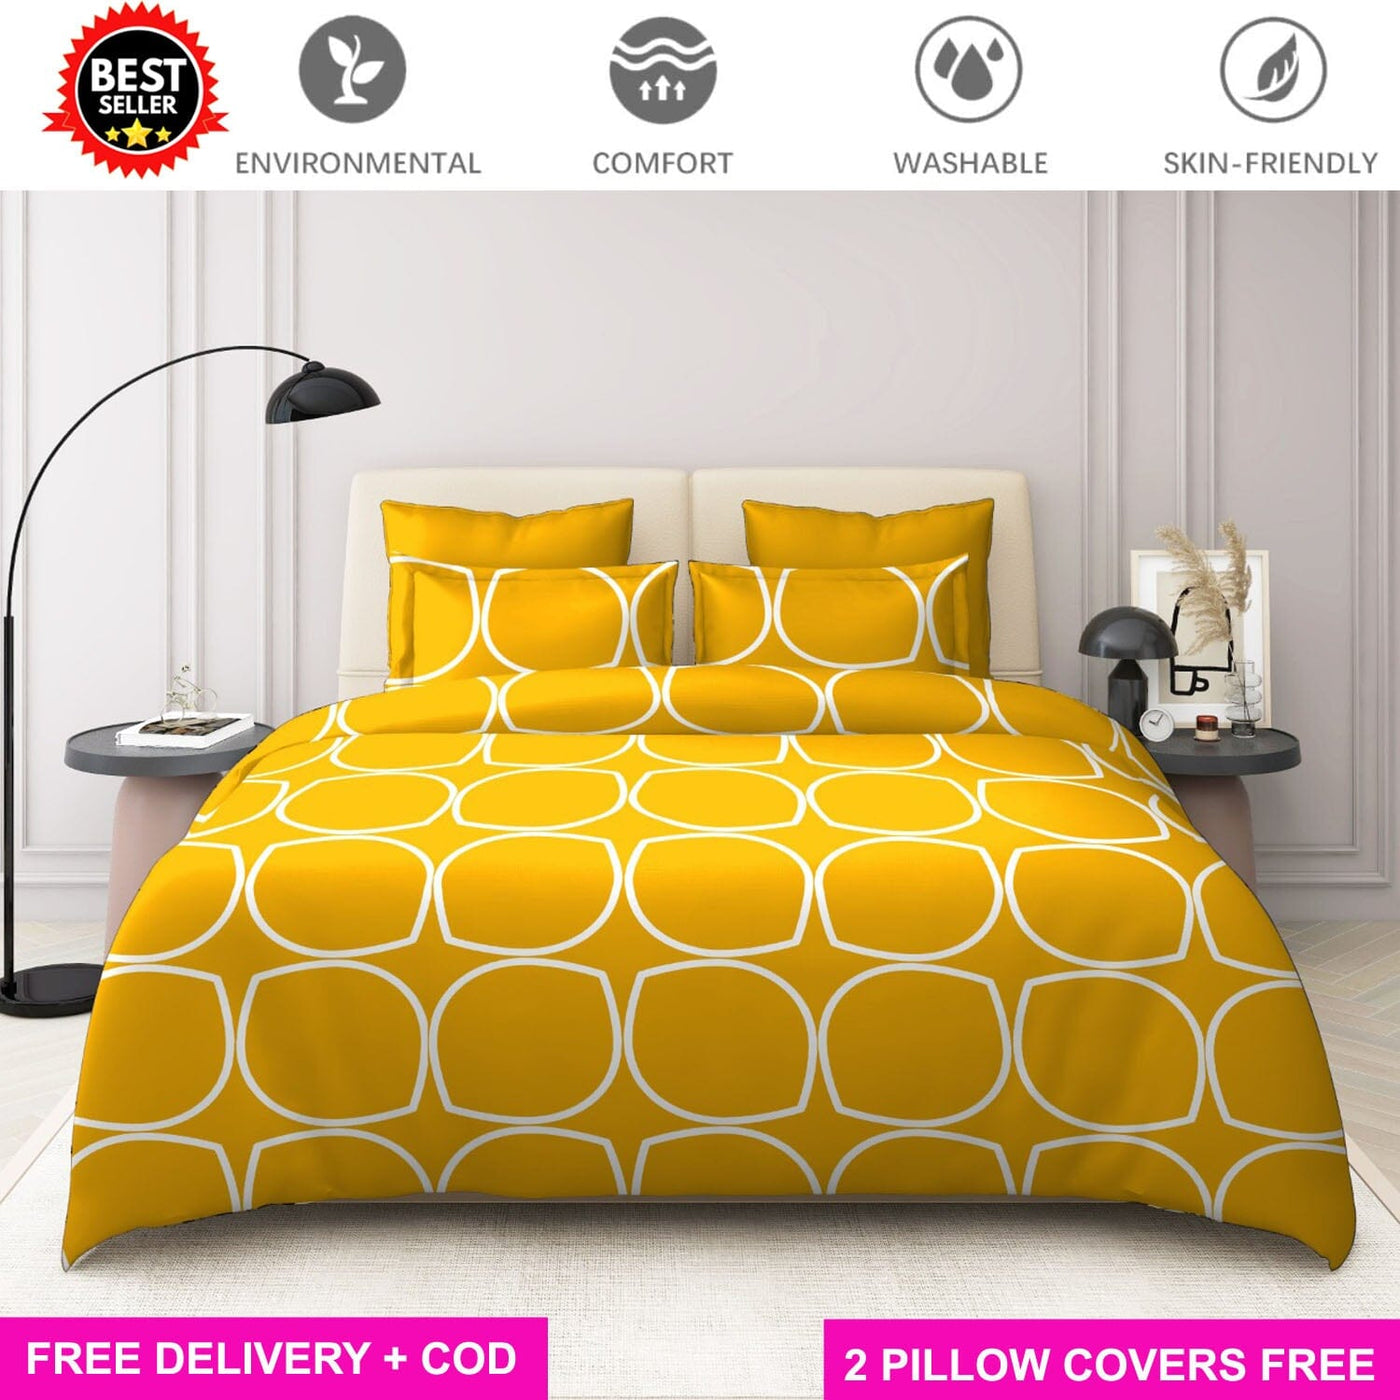 Yellow Ellipse Full Elastic Fitted Bedsheet with 2 Pillow Covers - King Size Bed Sheets Great Happy IN 